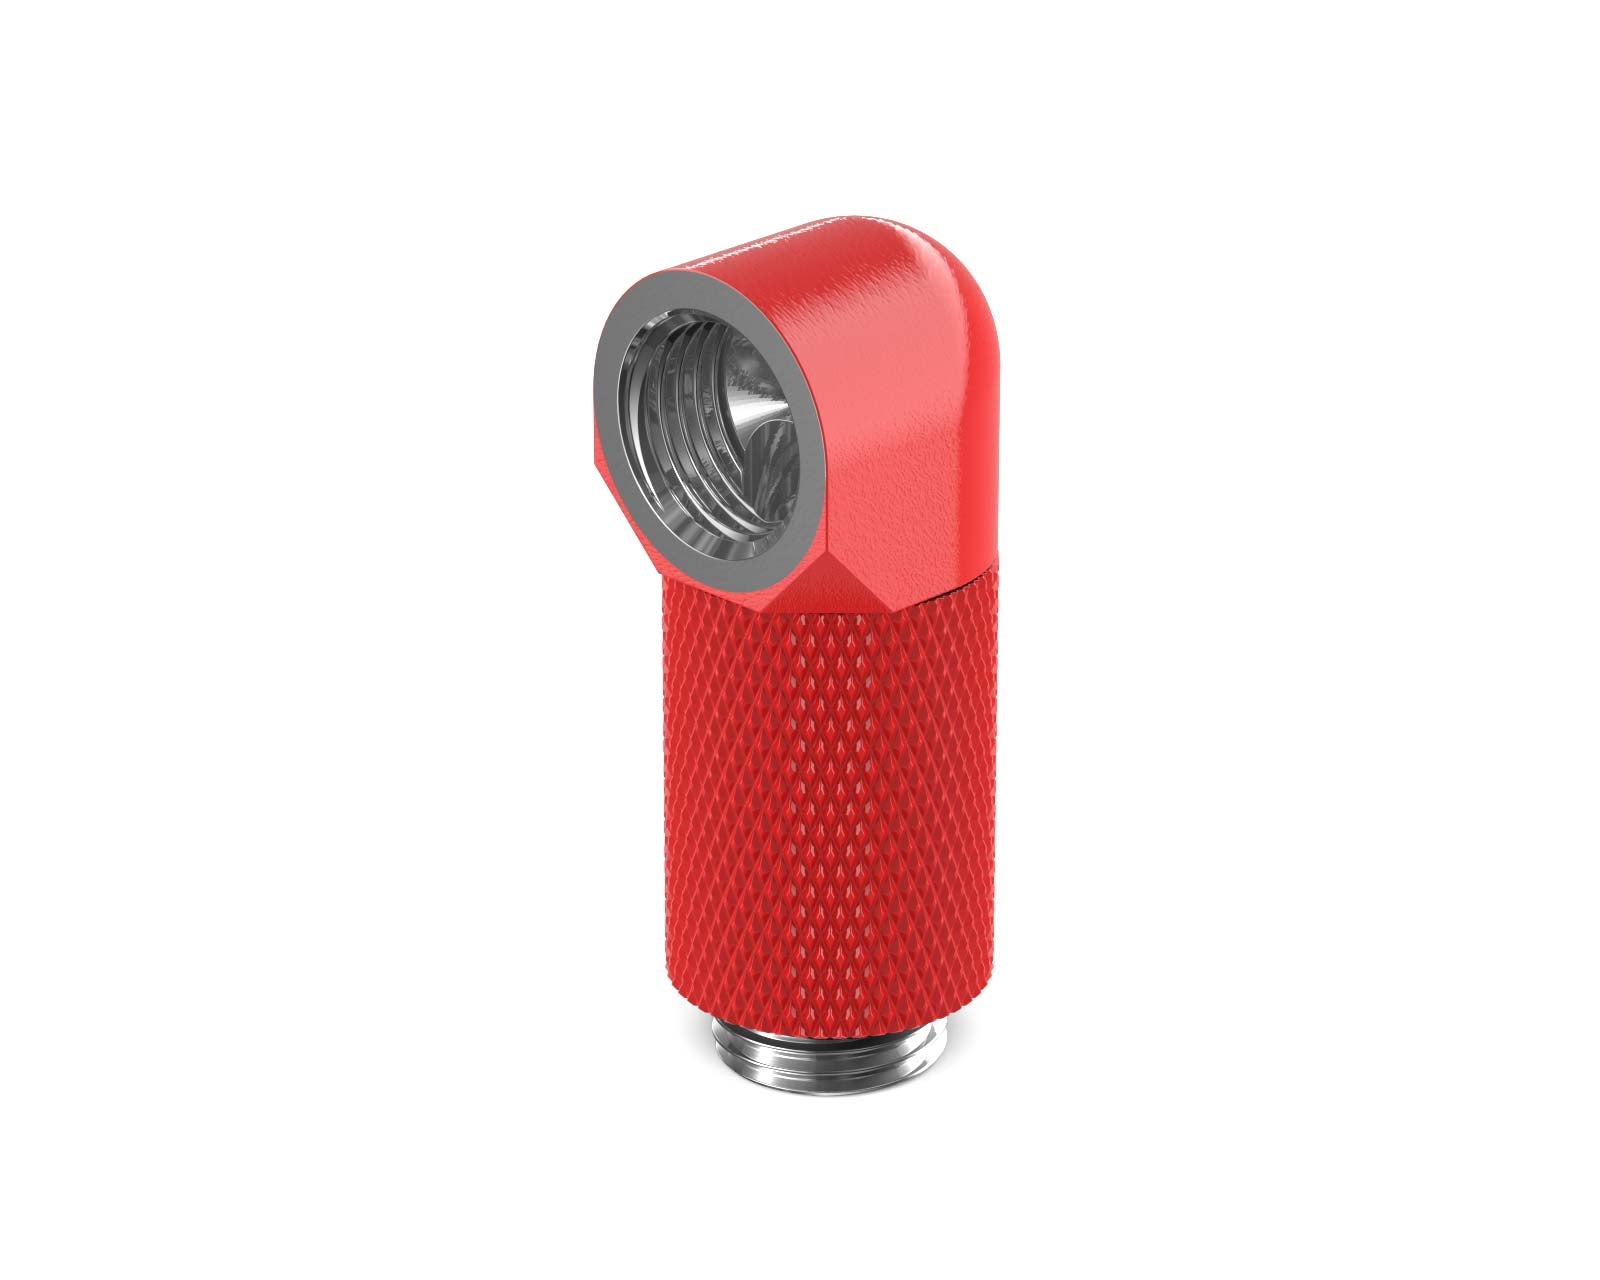 PrimoChill Male to Female G 1/4in. 90 Degree SX Rotary 25mm Extension Elbow Fitting - PrimoChill - KEEPING IT COOL Razor Red